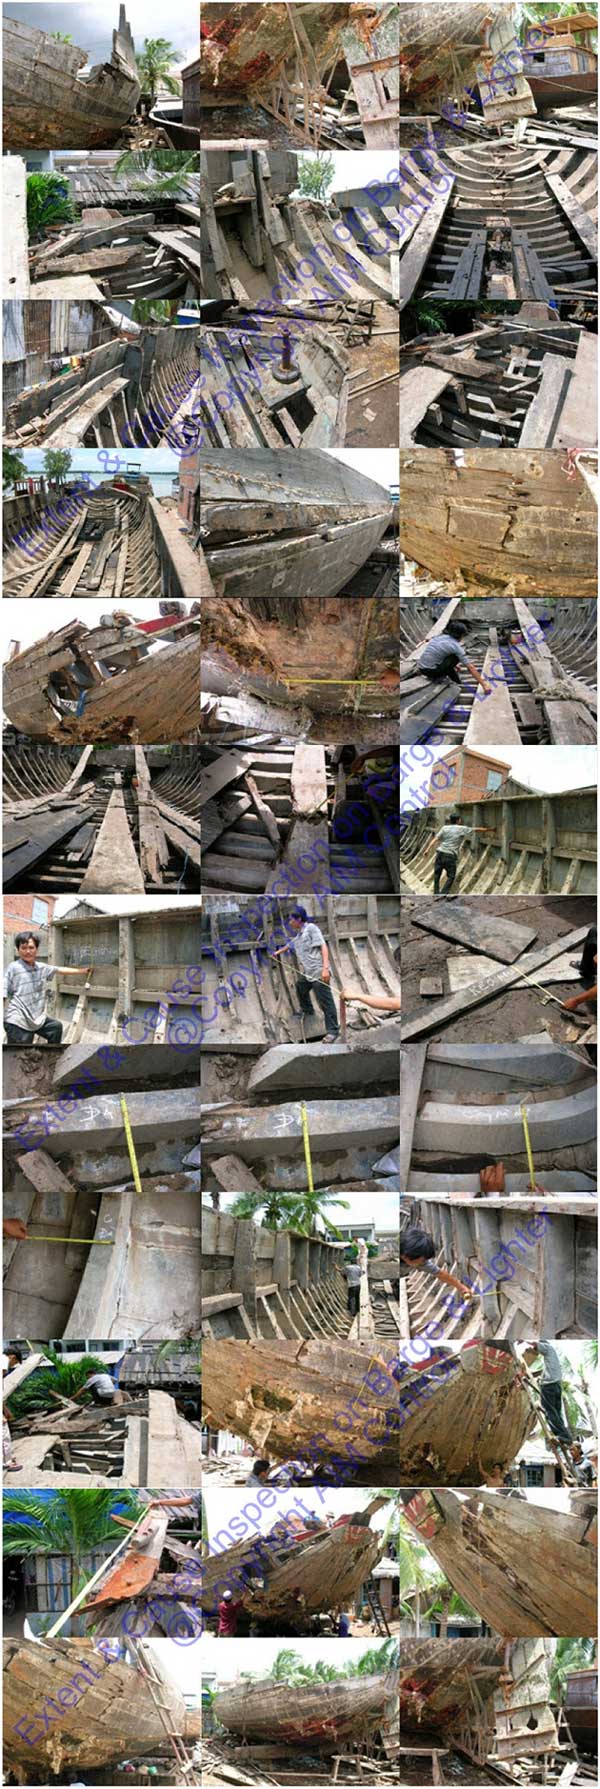 extent-cause-survey-inspection-carried-on-accidents-of-wood-boat-wrecked_AIM_Control